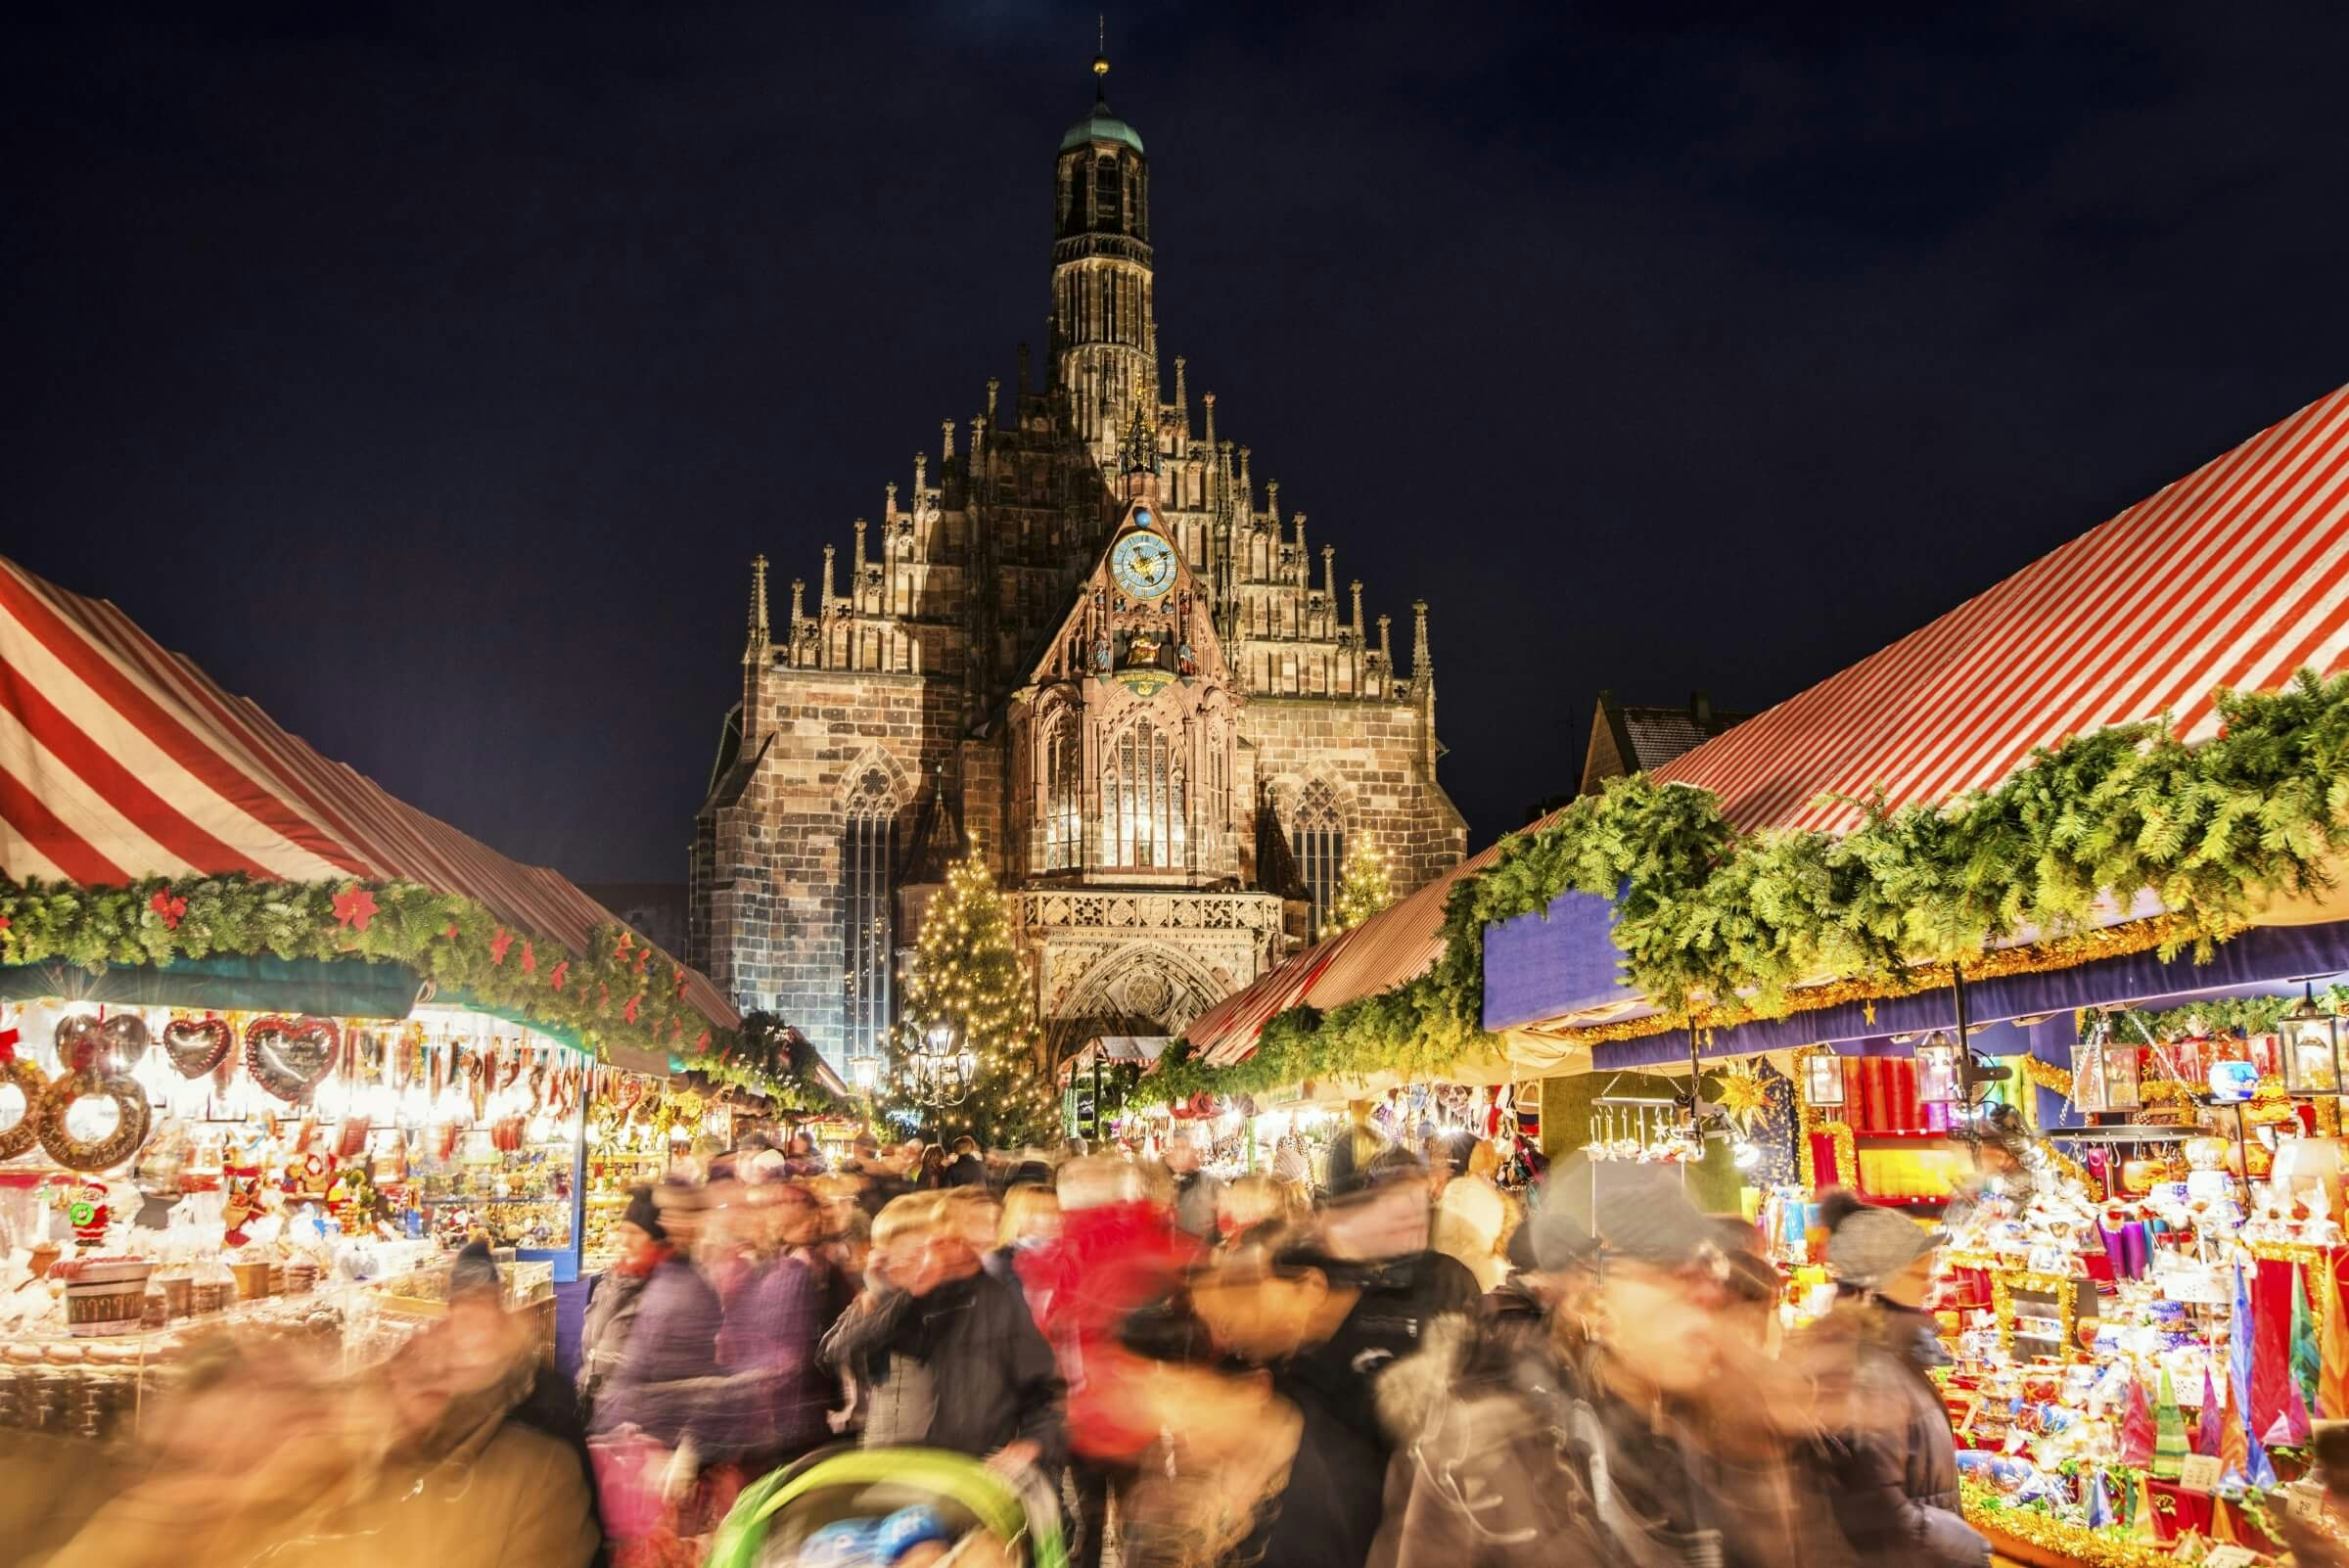 A blurred image of peoples and stalls and lights at a Christmas market with the Frauenkirche church in sharp focus in the background